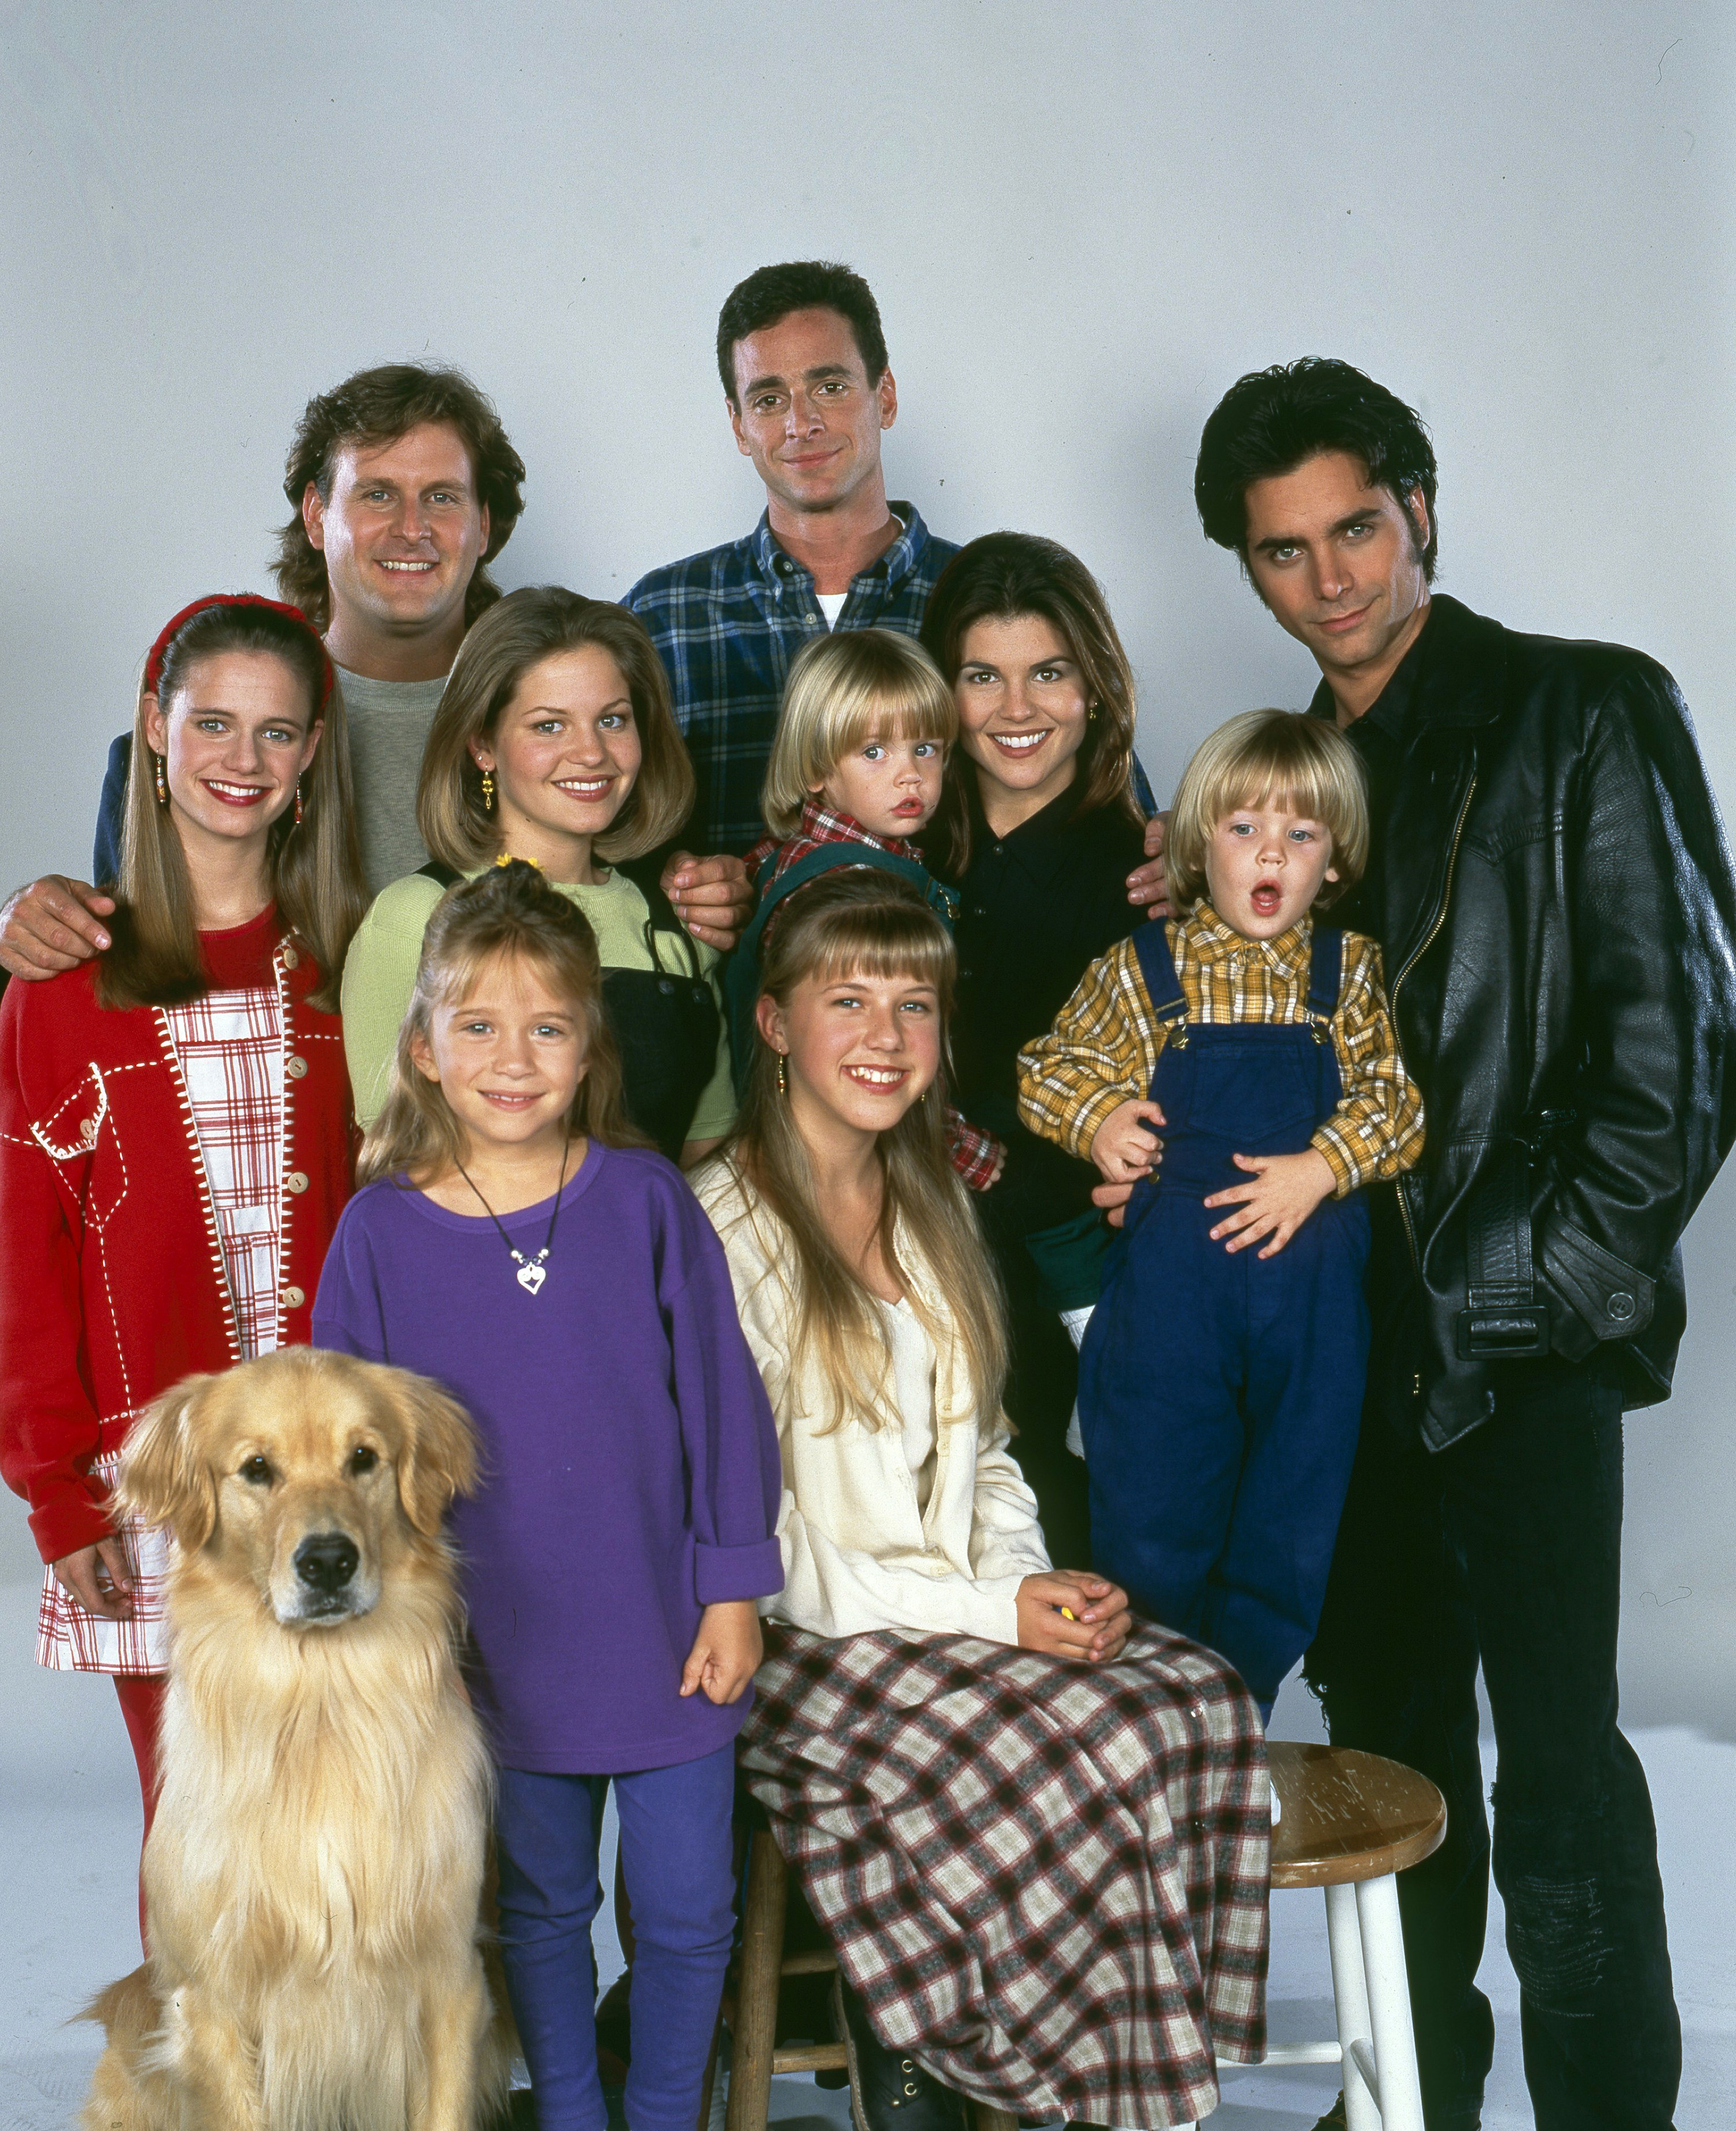 Andrea Barber, Dave Coulier, Mary-Kate Olsen/Ashley Olsen, Candace Cameron, Jodie Sweetin, Dylan Tuomy-Wilhoit/Blake Tuomy-Wilhoit, Lori Loughlin, and John Stamos pose in a promotional photo for Full House